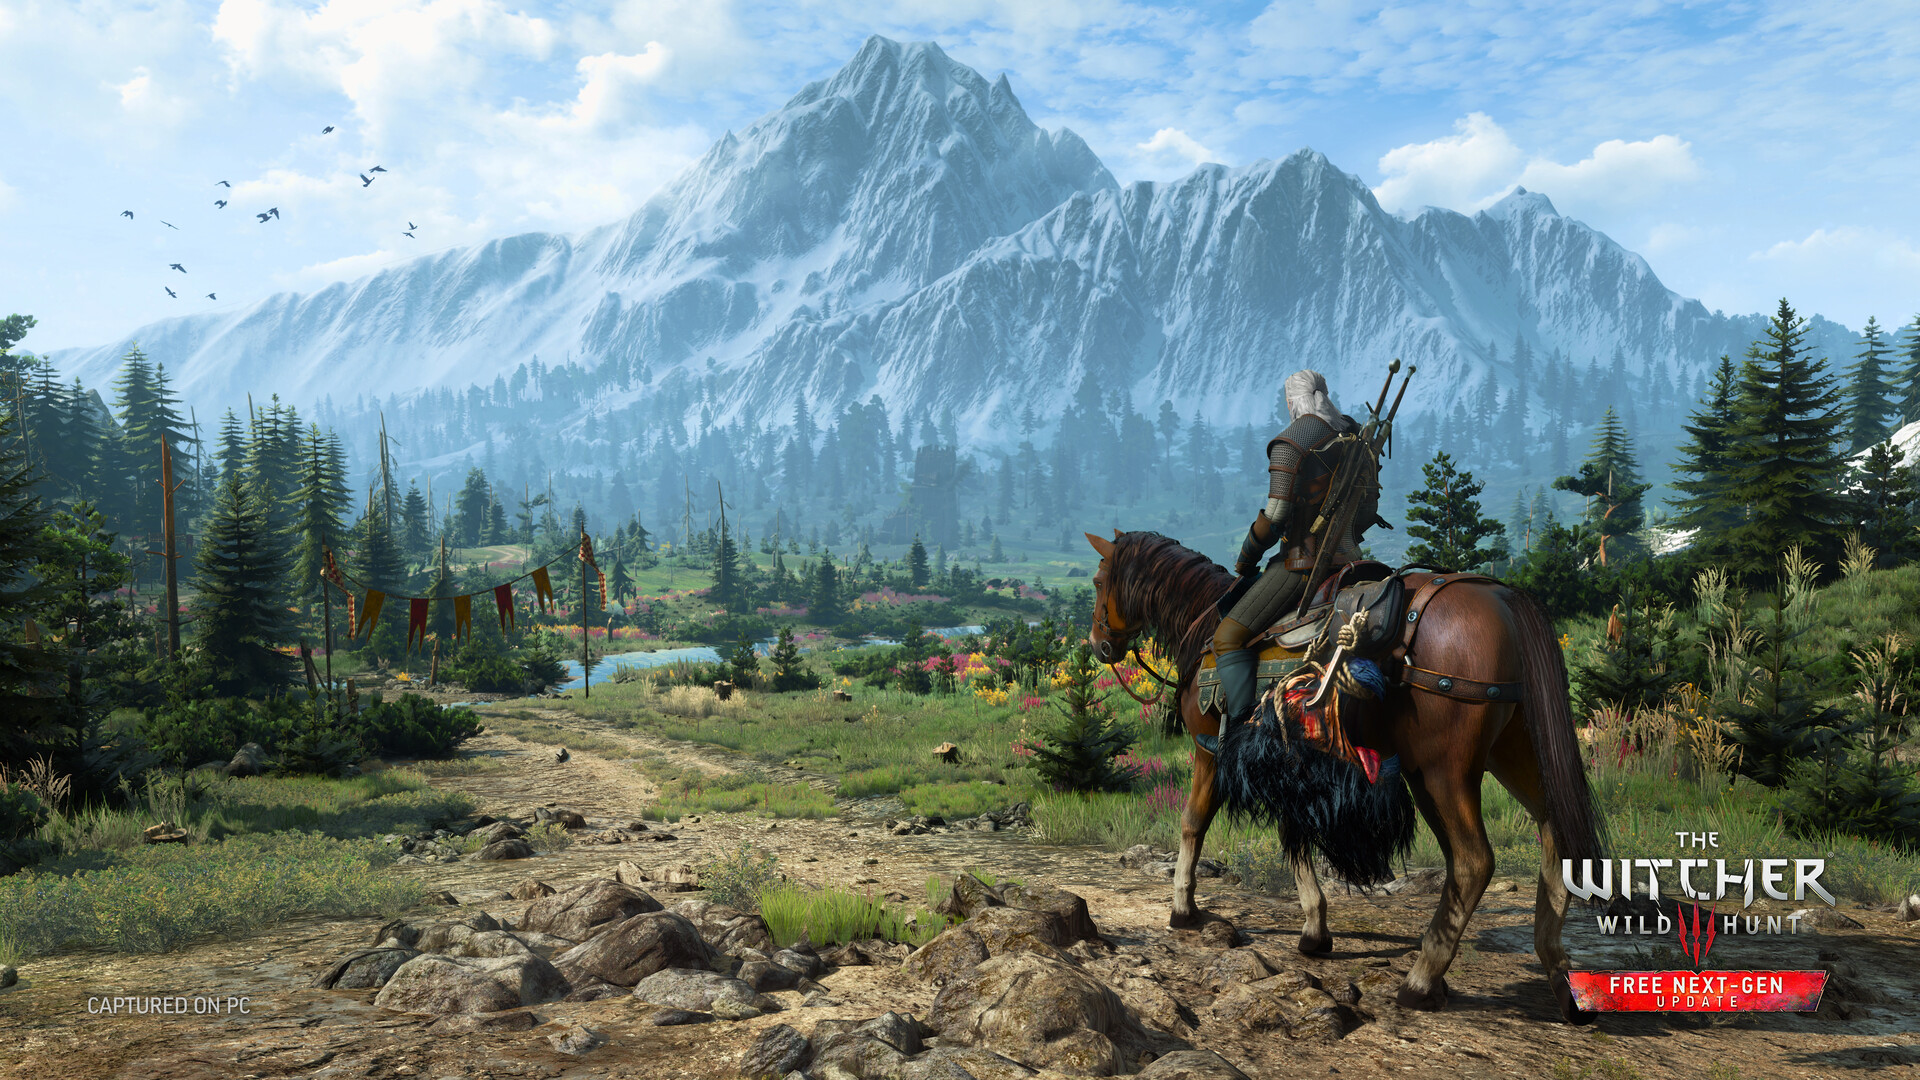 The Witcher 3: Wild Hunt - Complete Edition - Next Gen Update (RUS|ENG|MULTi16) [RePack] от R.G. Механики